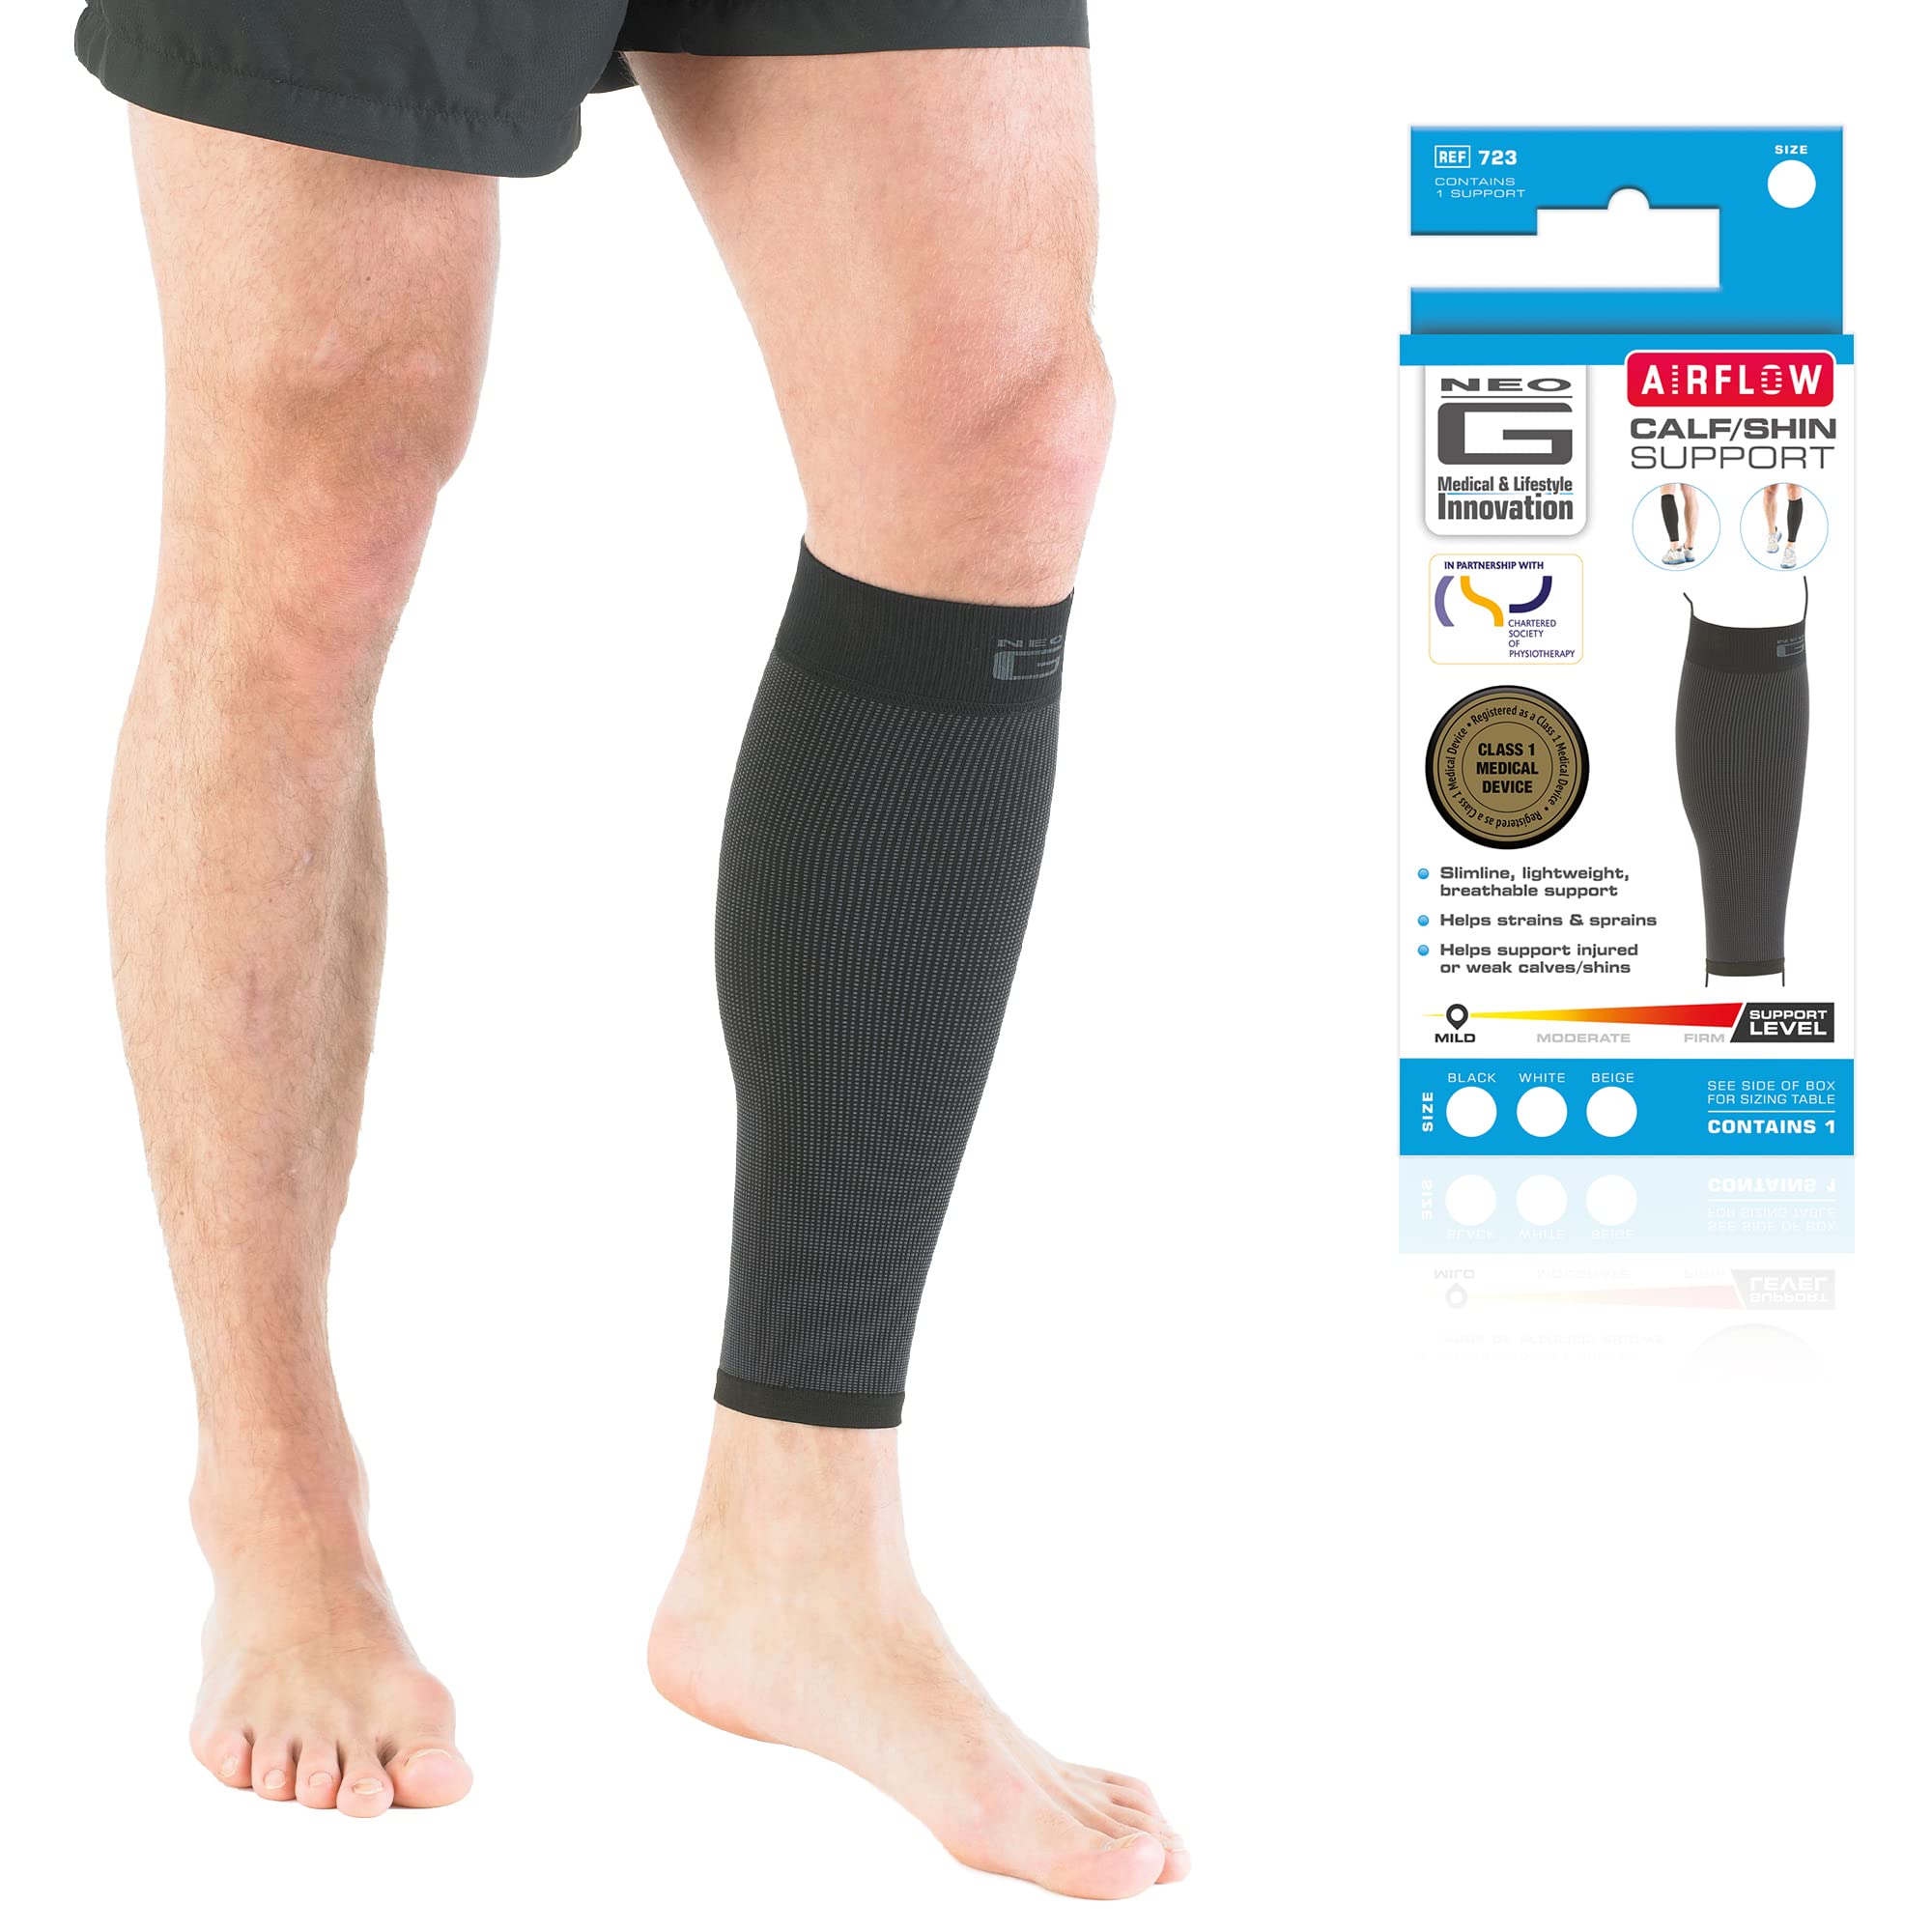 Neo-G Calf Support for Running Sports Daily Wear Shin support for Pain  Relief from Calf Injury Strains Sprains Weak Calves Shin Splints Support - Calf  Compression Sleeve Men Women - S SMALL